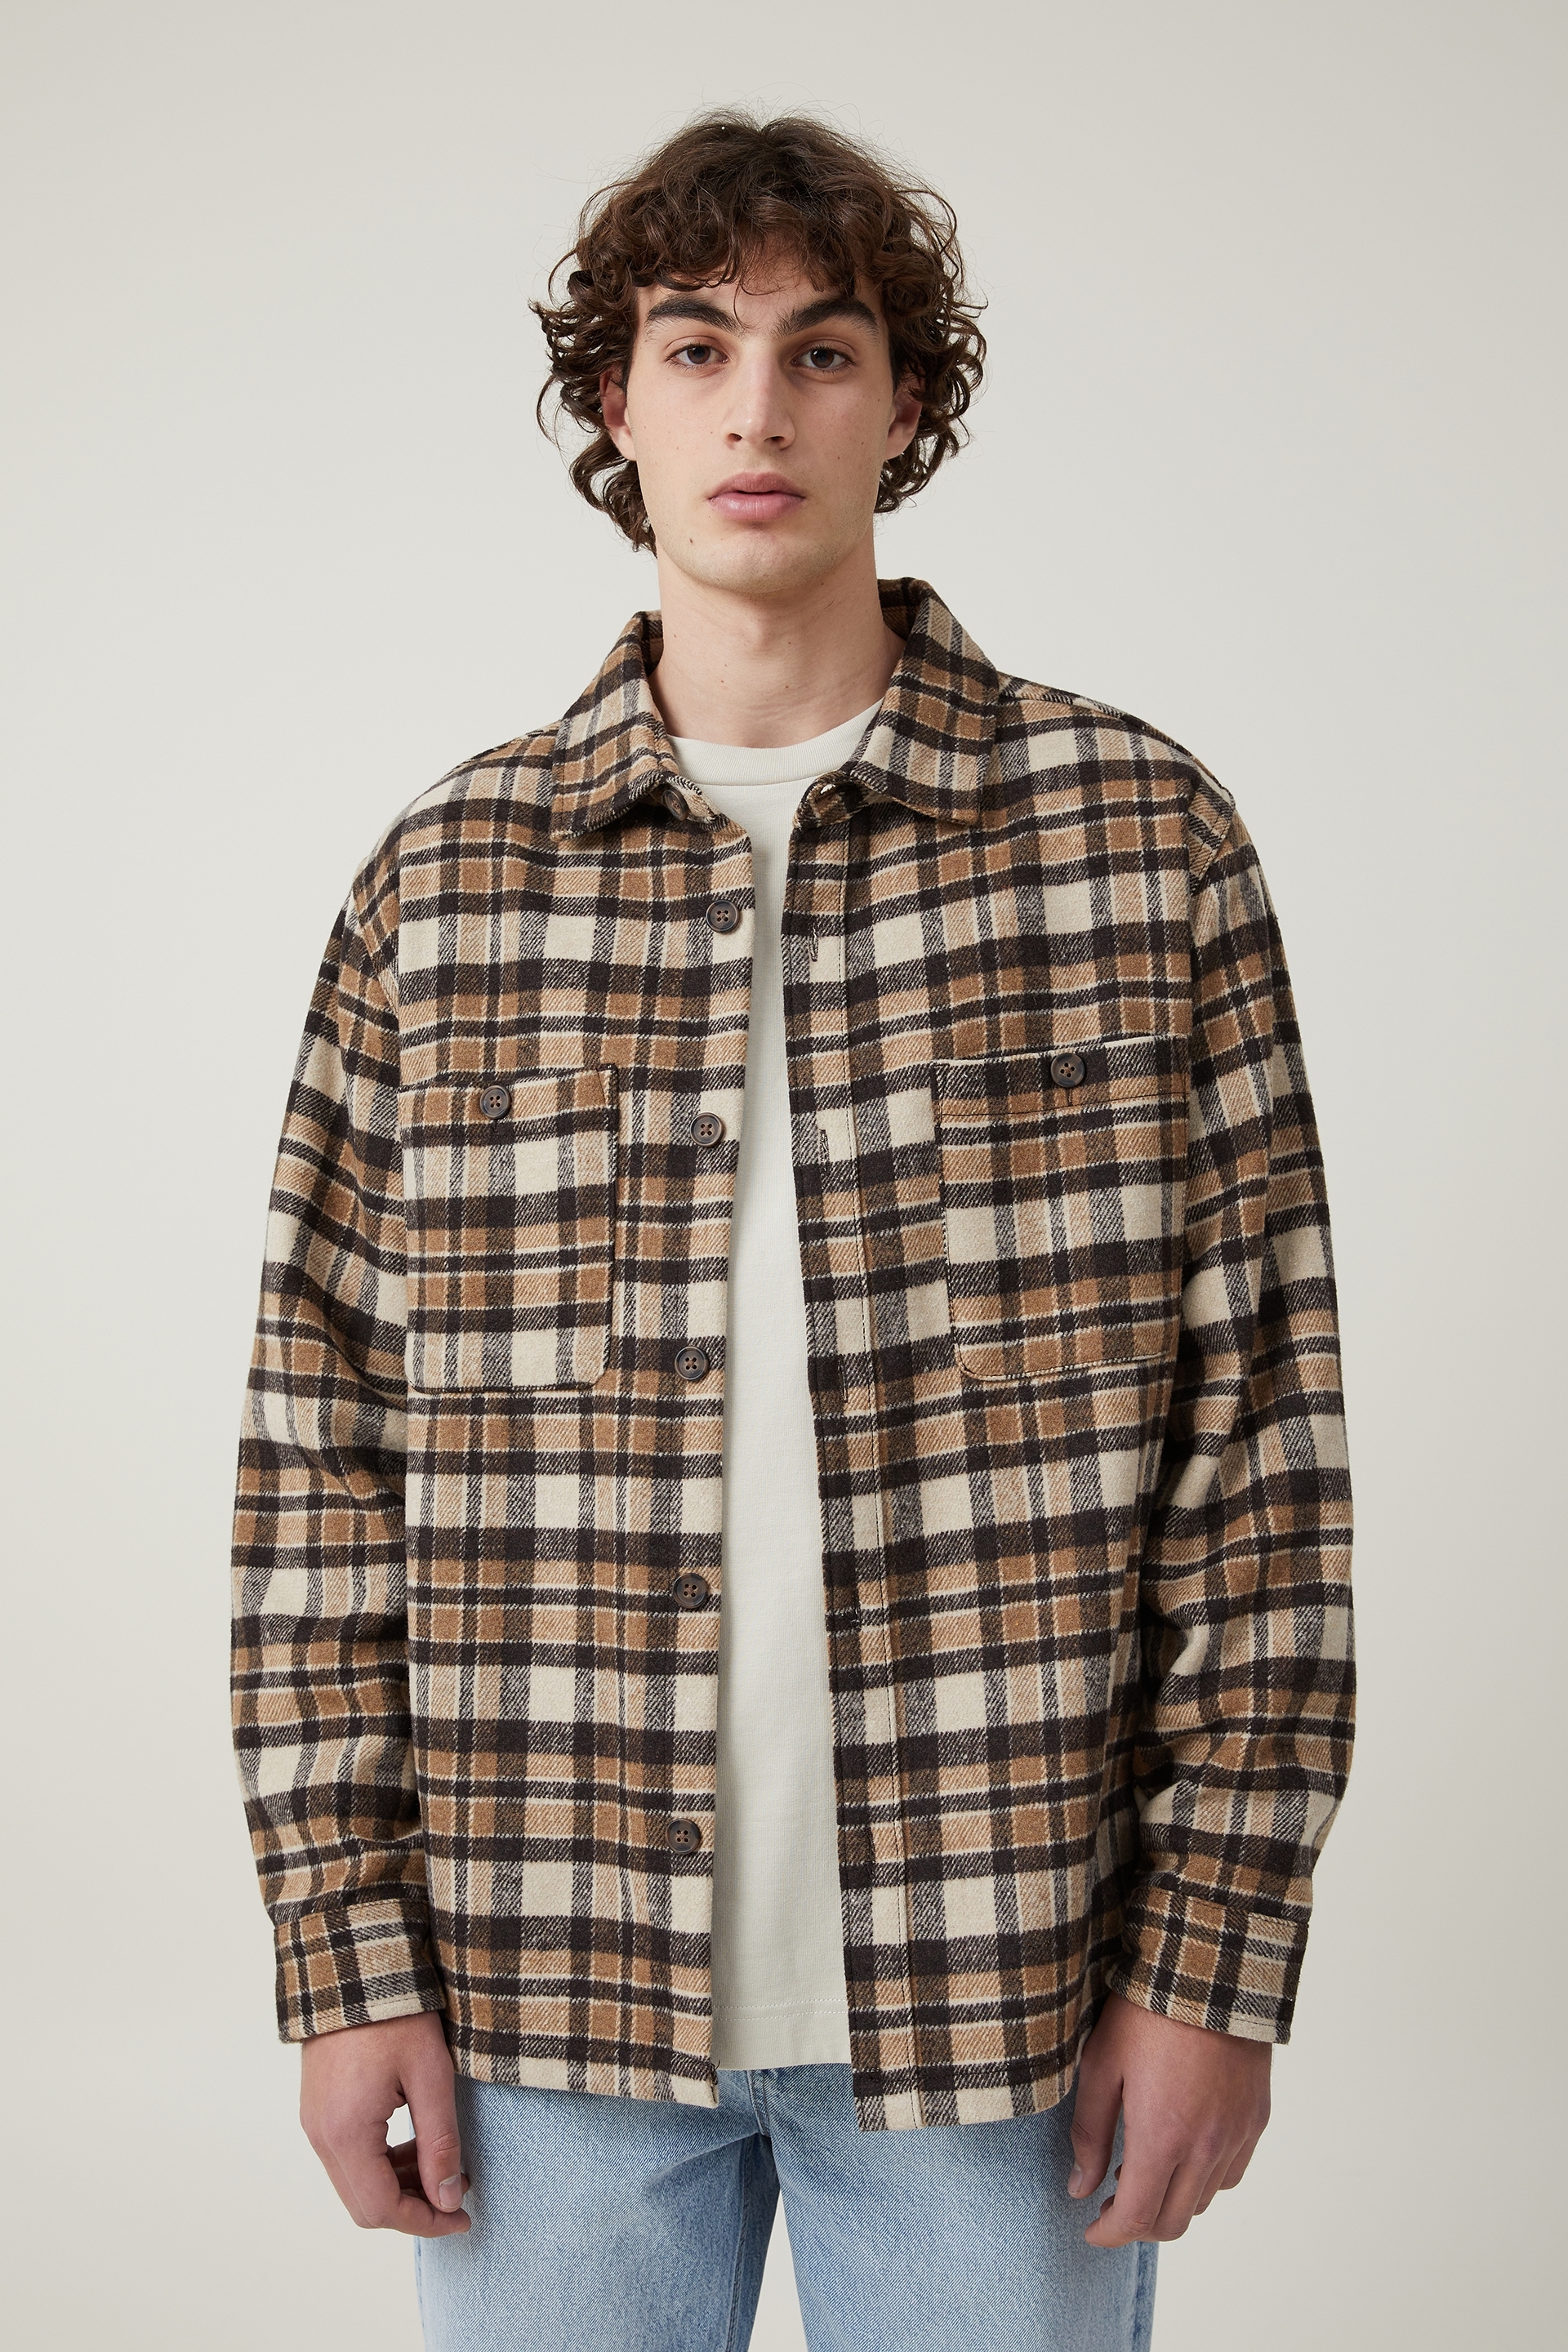 Cotton On Men - Heavy Overshirt - Natural oversized check